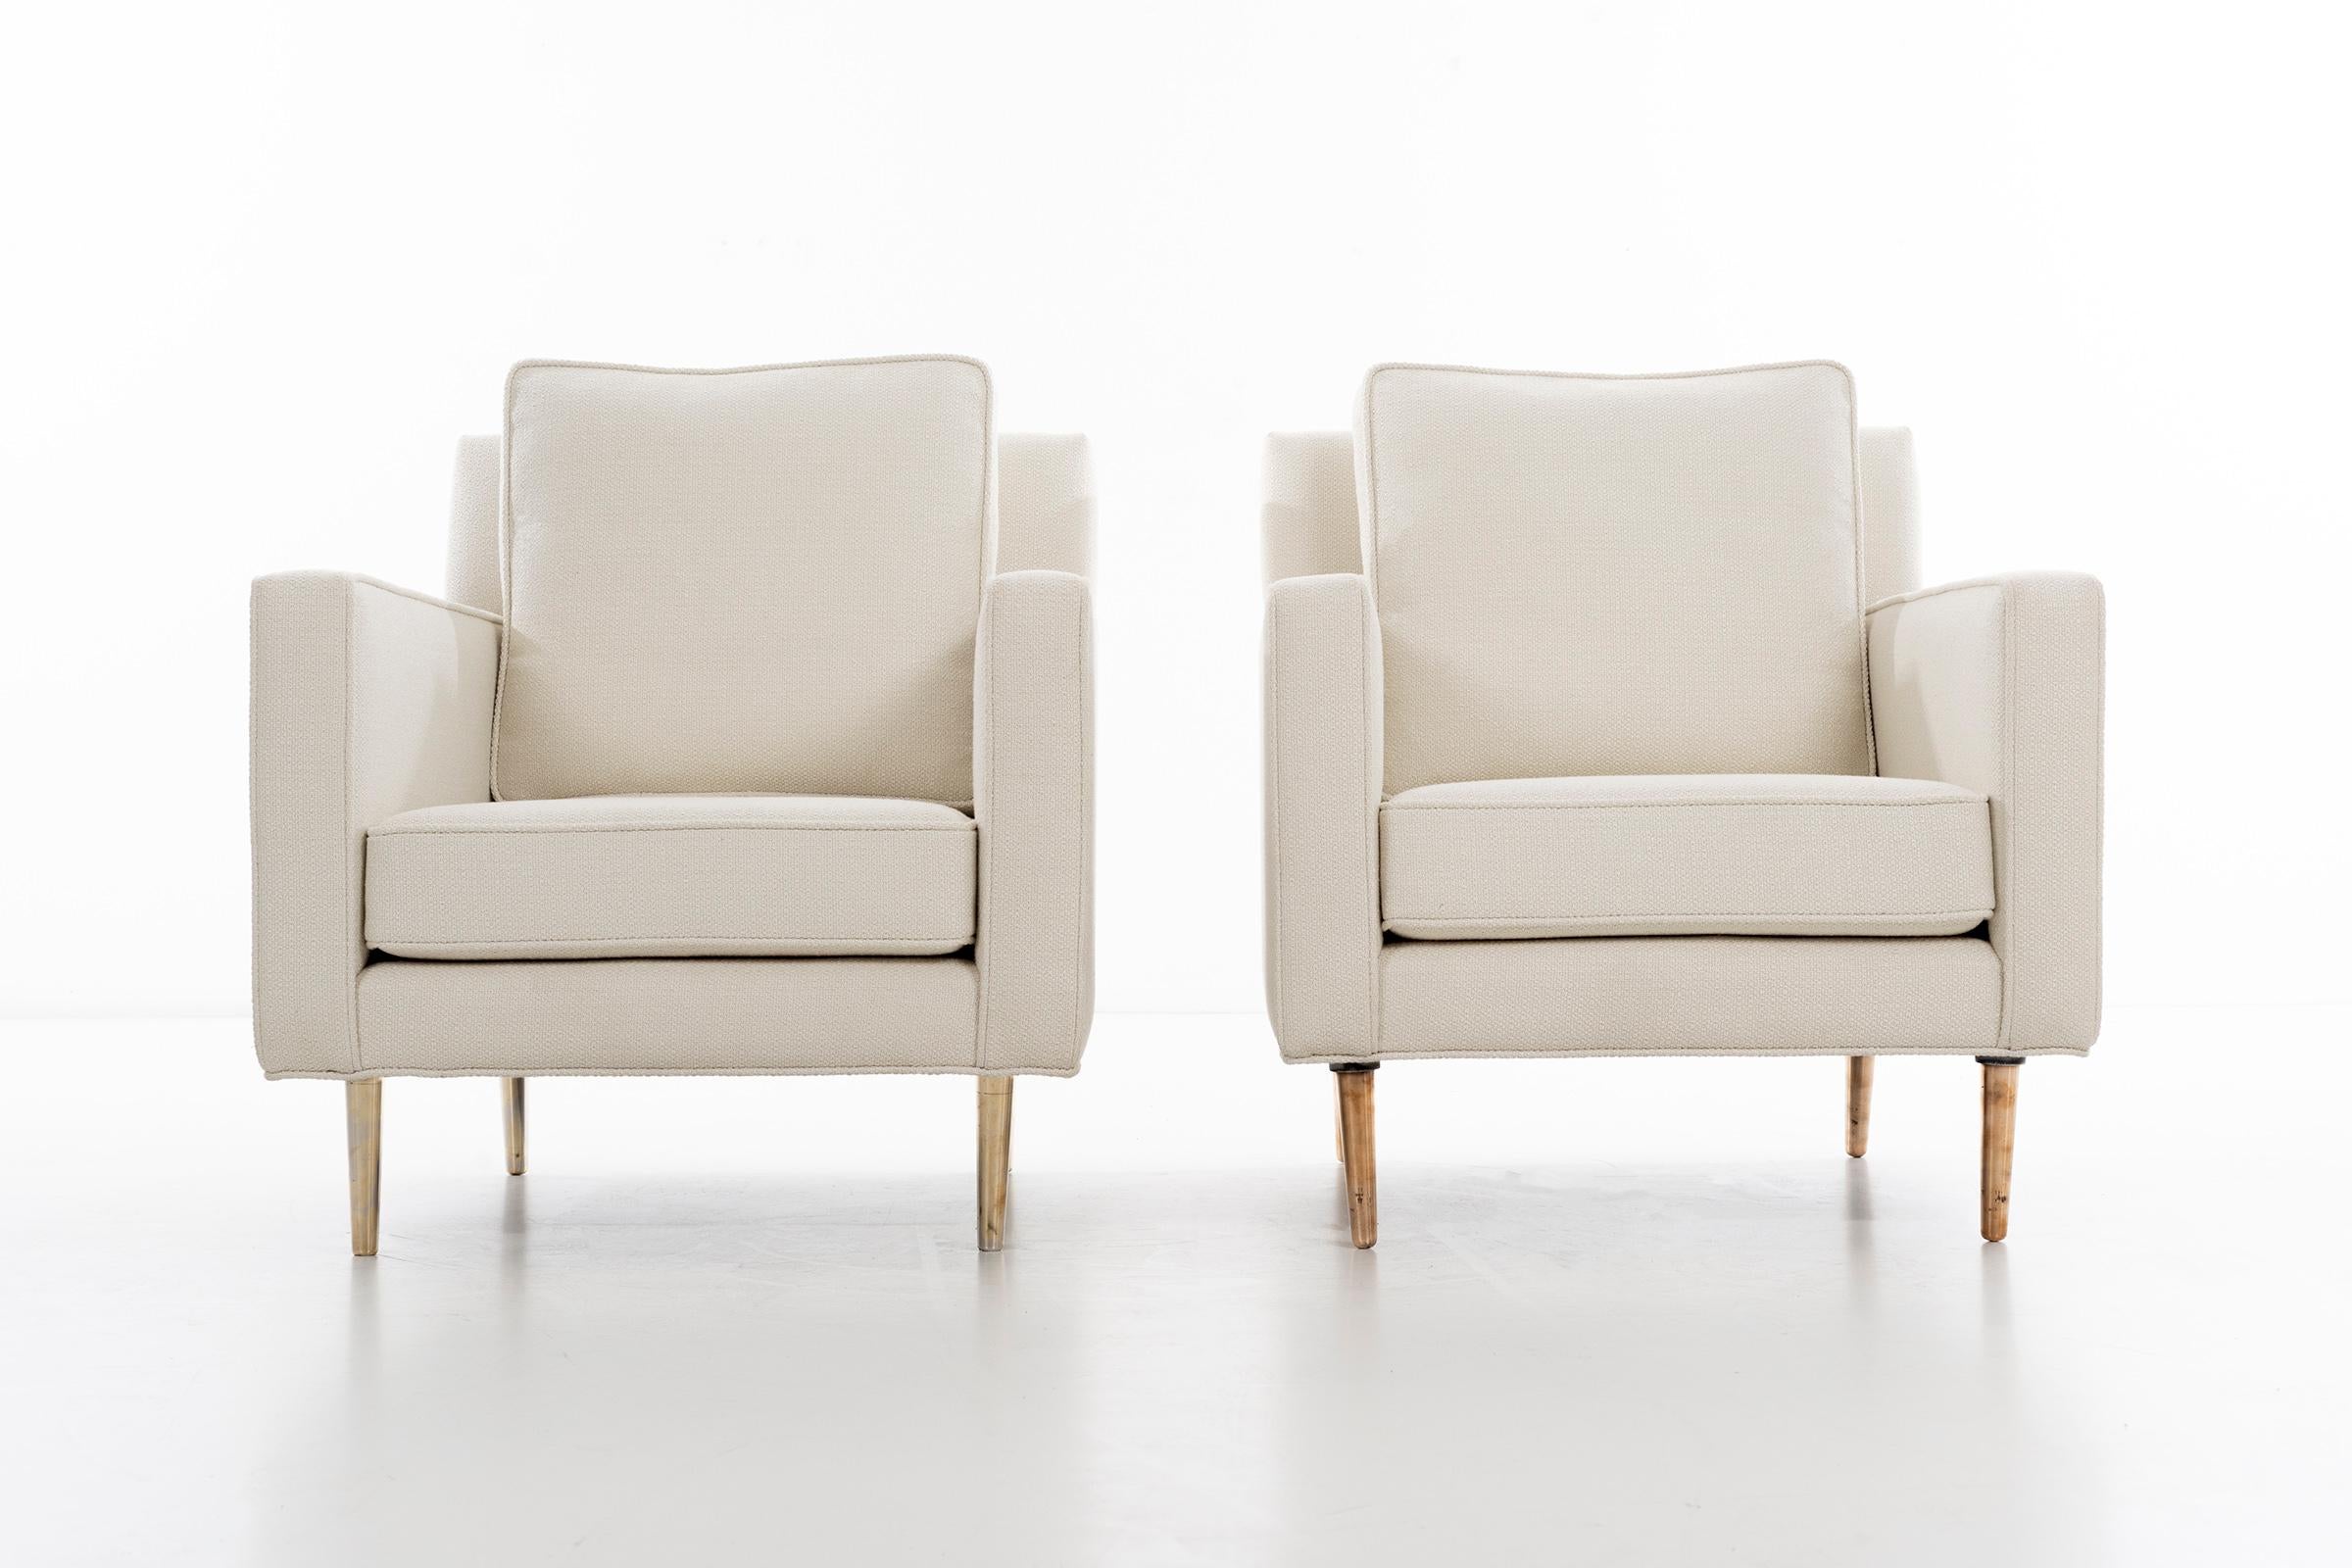 Wormley for Dunbar, classic pair of lounges, features; solid brass tapered legs, reupholstered with great plains woven wool blend.
Price is for pair.